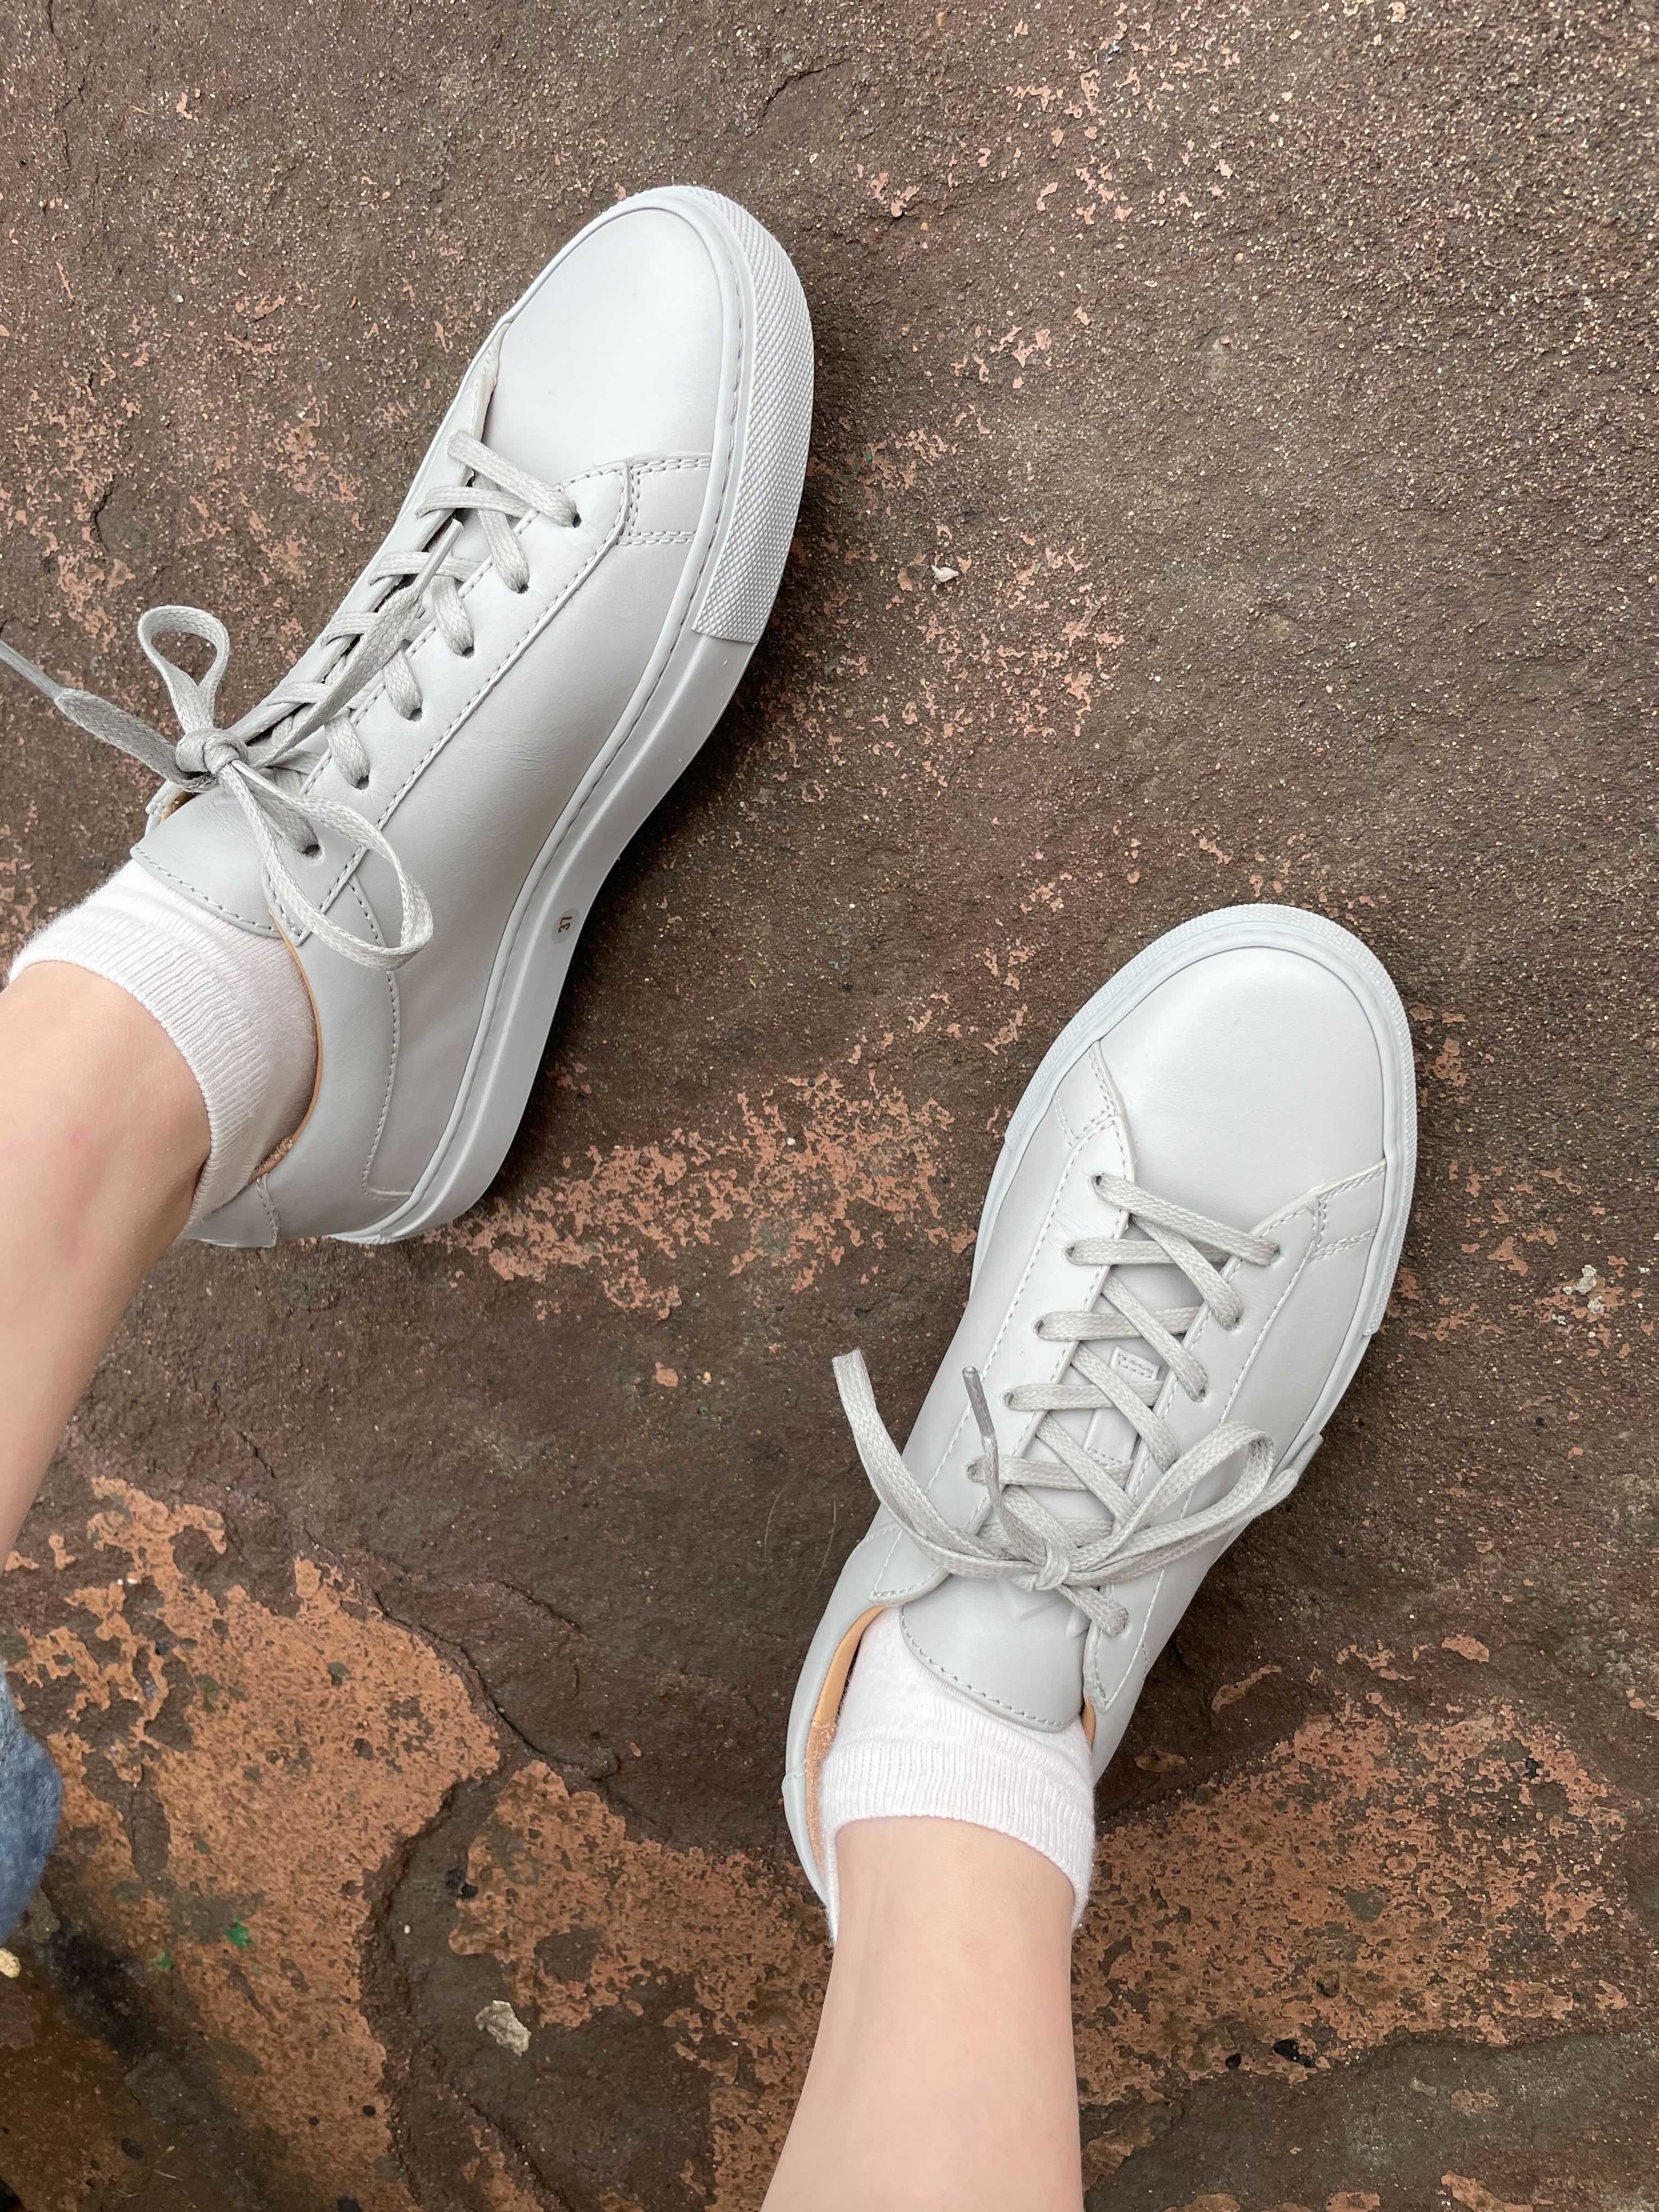 buzzfeed editor wearing the shoes in gray